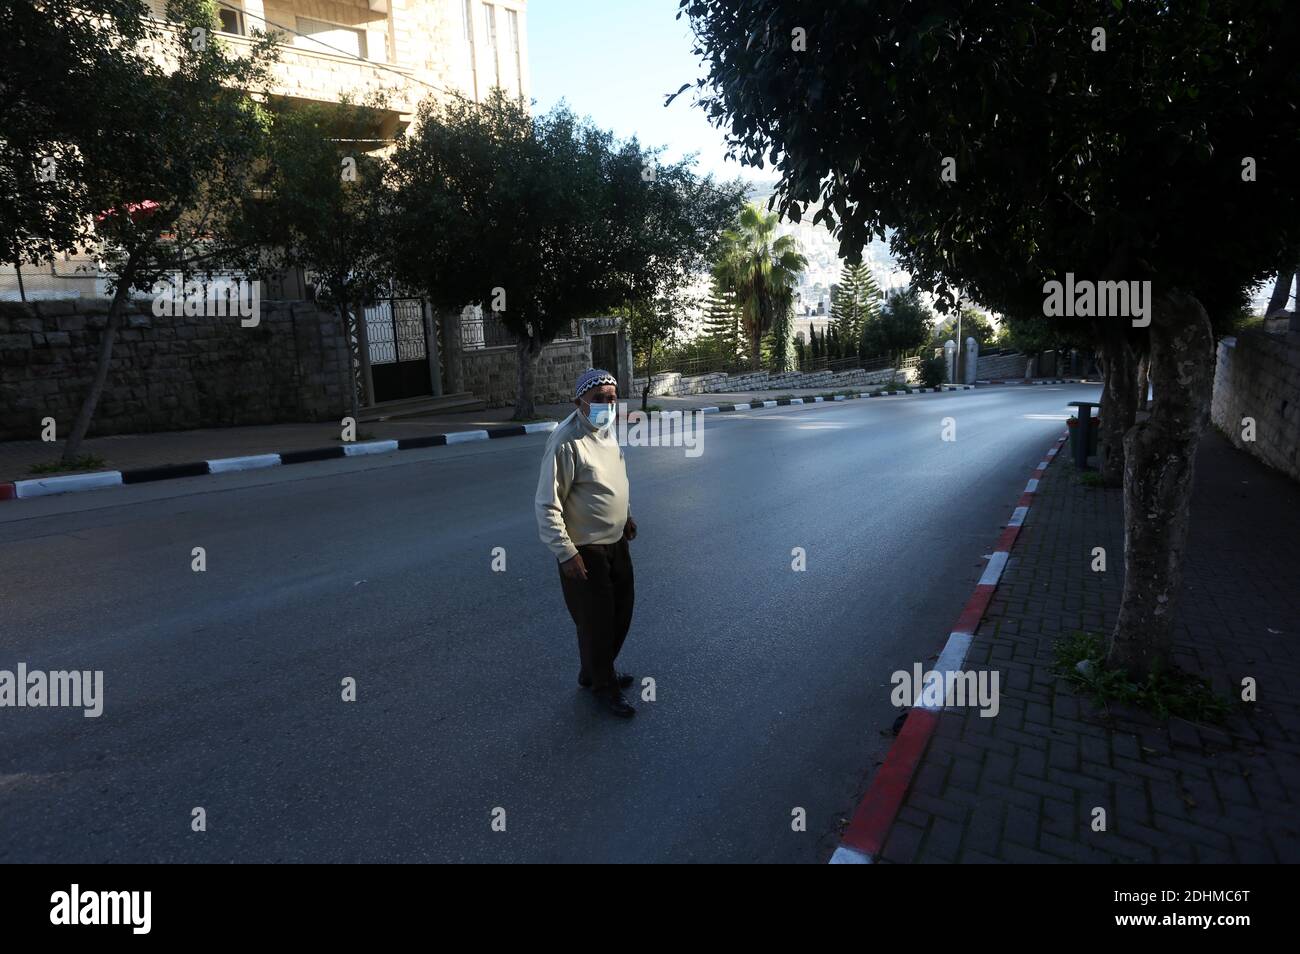 Nablus. 11th Dec, 2020. An elderly Palestinian man crosses an empty road in the West Bank city of Nablus, on Dec. 11, 2020. Palestine reported 1,743 new coronavirus cases, taking the tally of infections in the Palestinian territories to 121,157, including 1,029 deaths and 94,349 recoveries. Four Palestinian districts in the West Bank, including Nablus, Tulkarm, Bethlehem, and Hebron, went into a full weeklong lockdown that began on Thursday night. Credit: Ayman Nobani/Xinhua/Alamy Live News Stock Photo